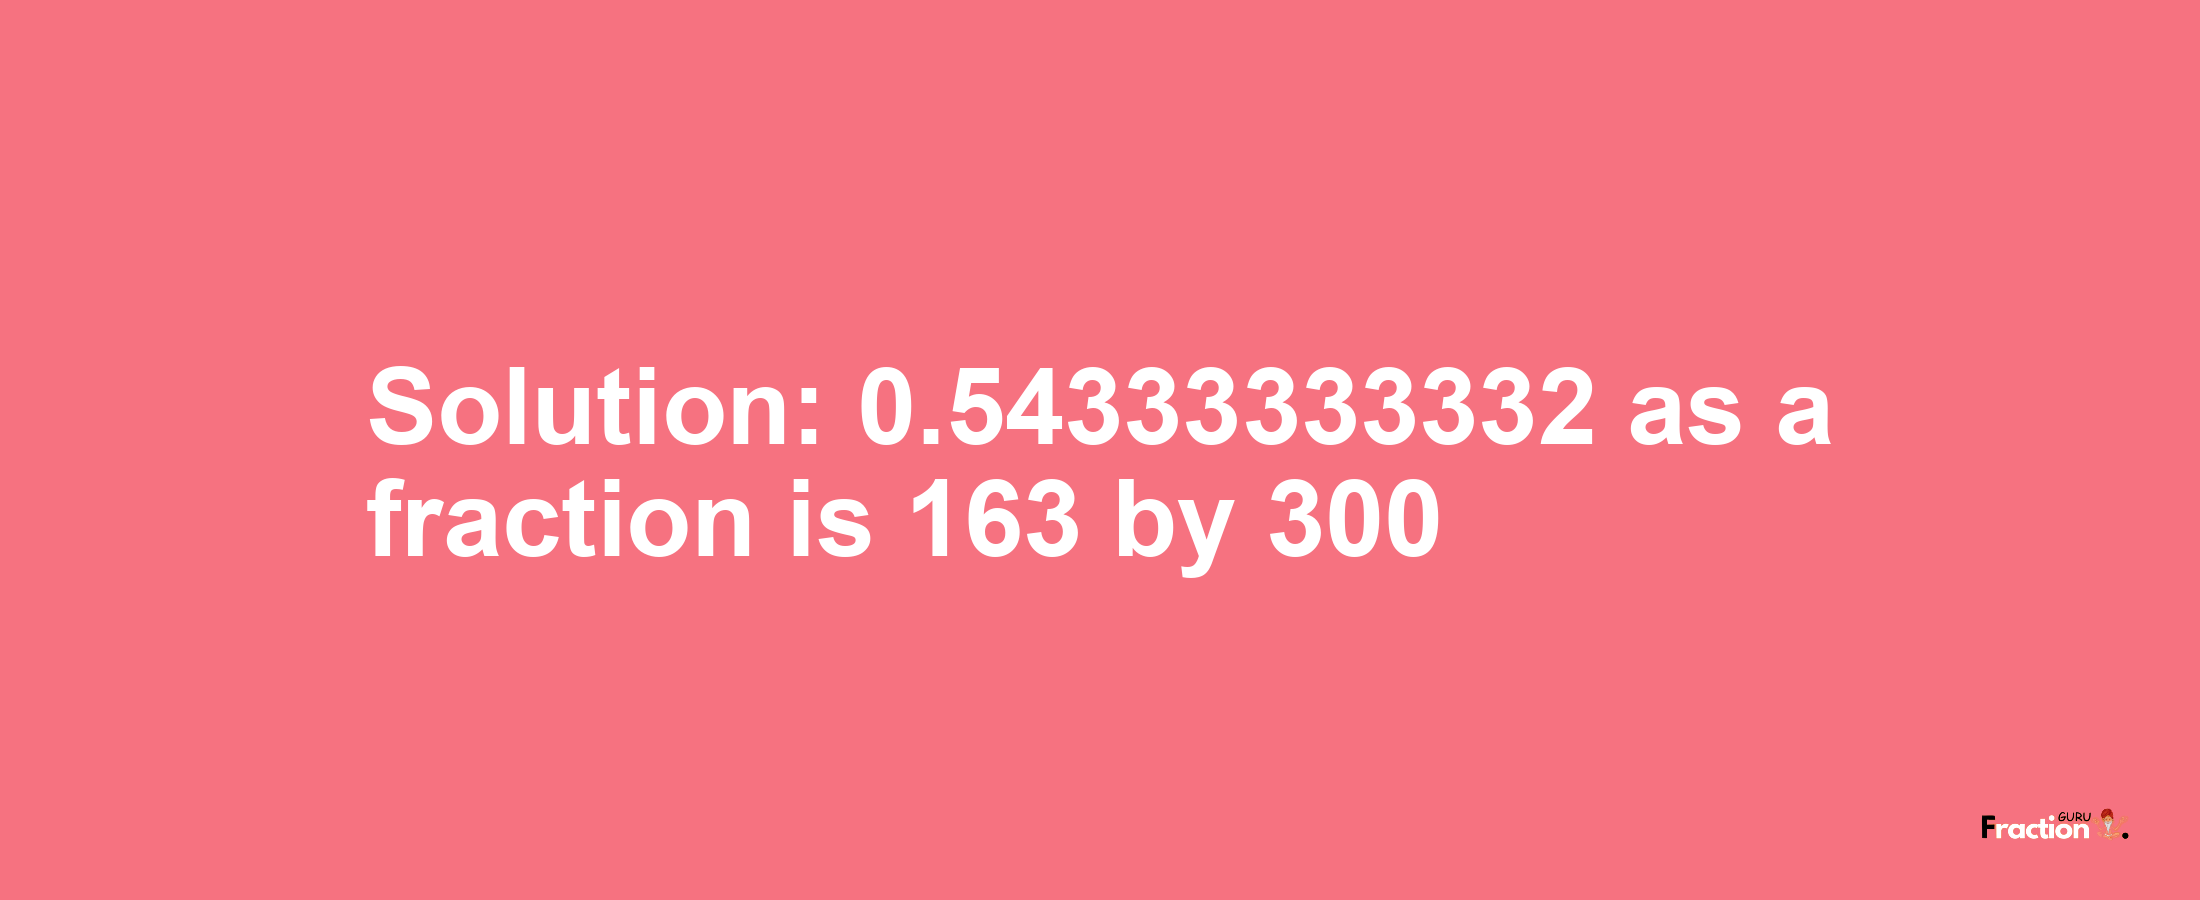 Solution:0.54333333332 as a fraction is 163/300